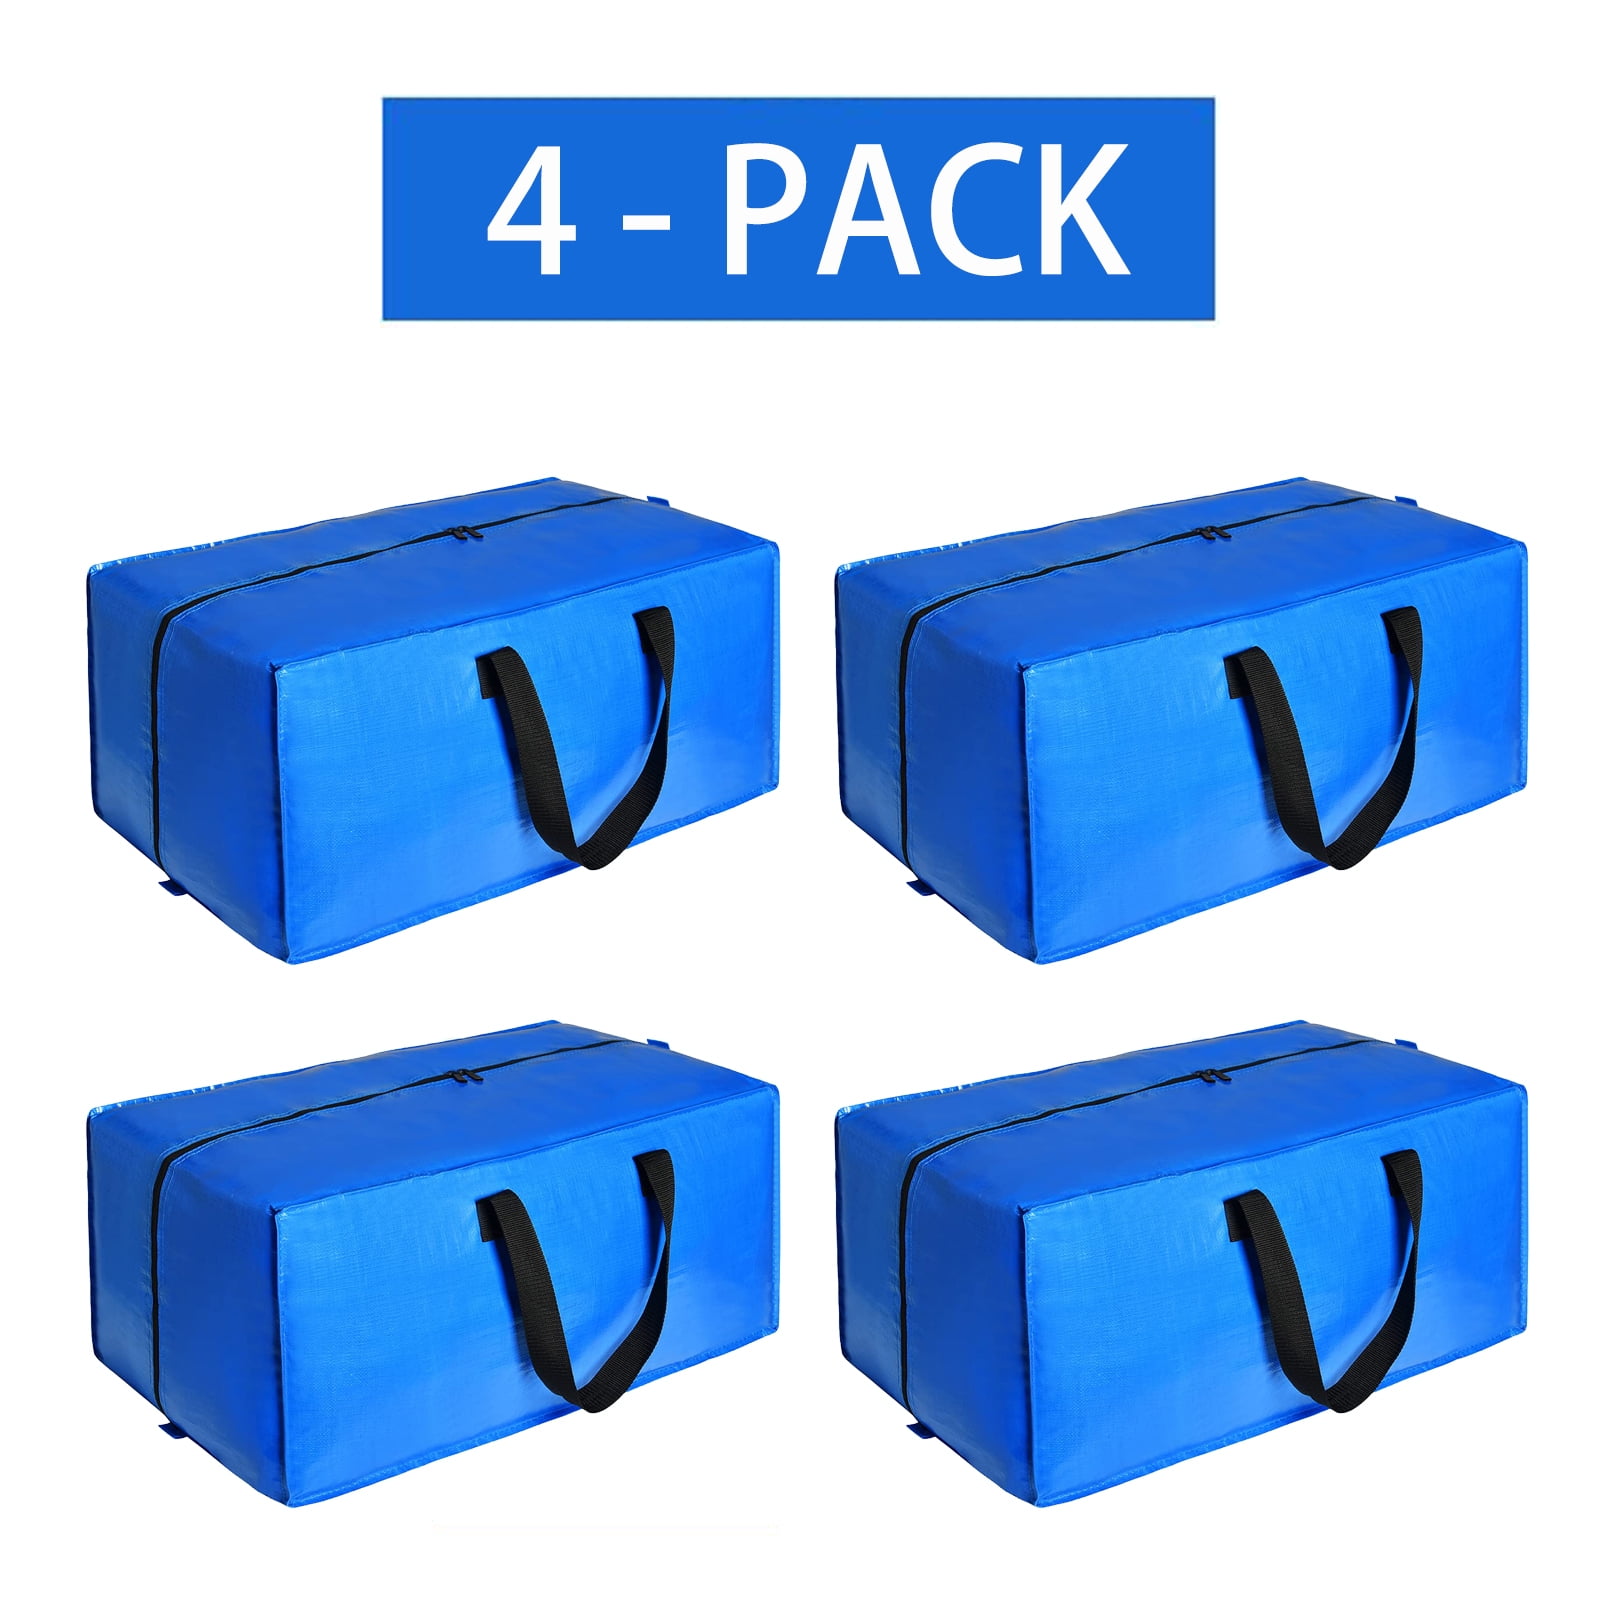 StorageRight Moving Bags-Heavy Duty Moving Boxes, Storage Totes with  Zipper, Reinforced Handles and Tag Pocket-Collapsible Moving Supplies for  moving